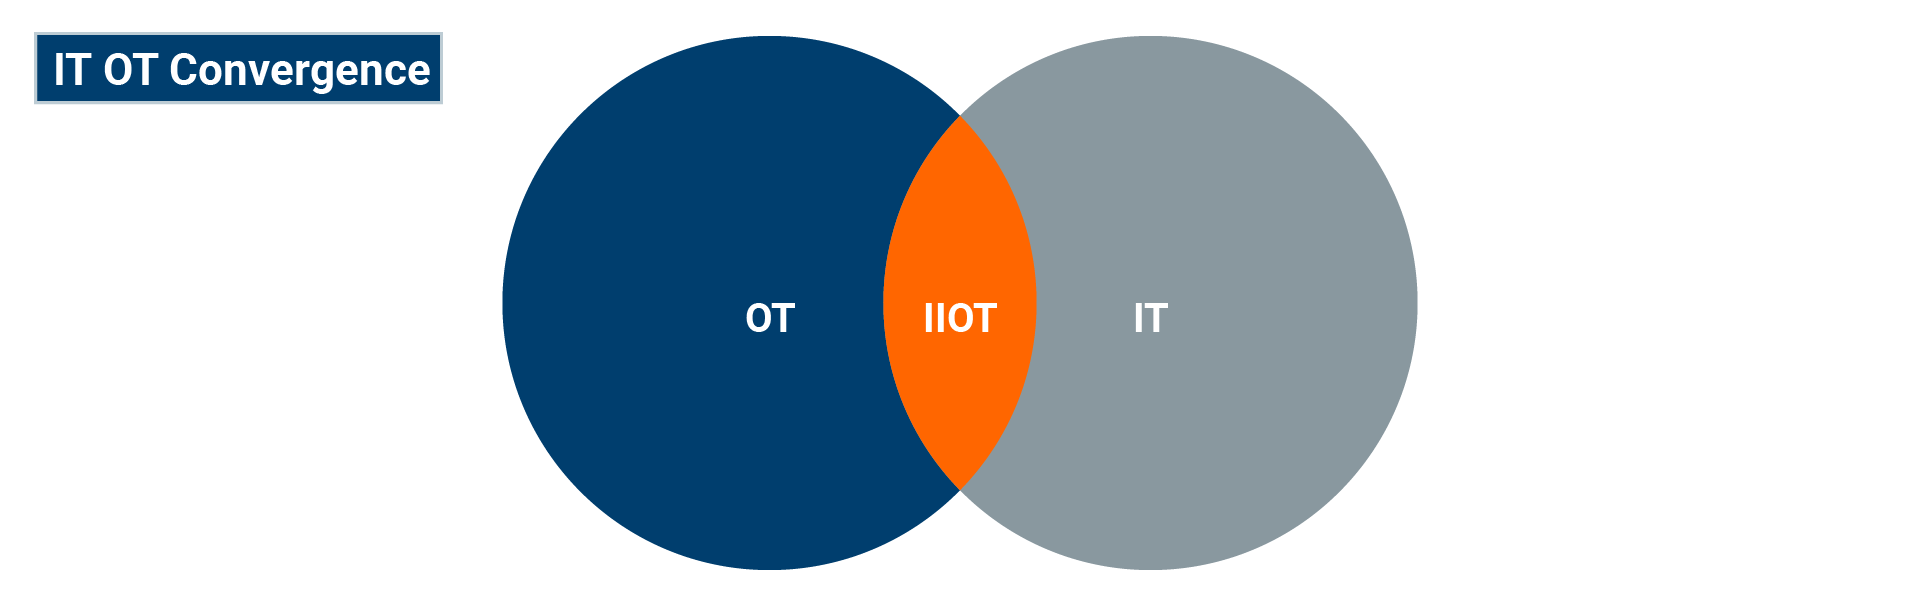 IIoT serves as the intersection point between OT and IT systems